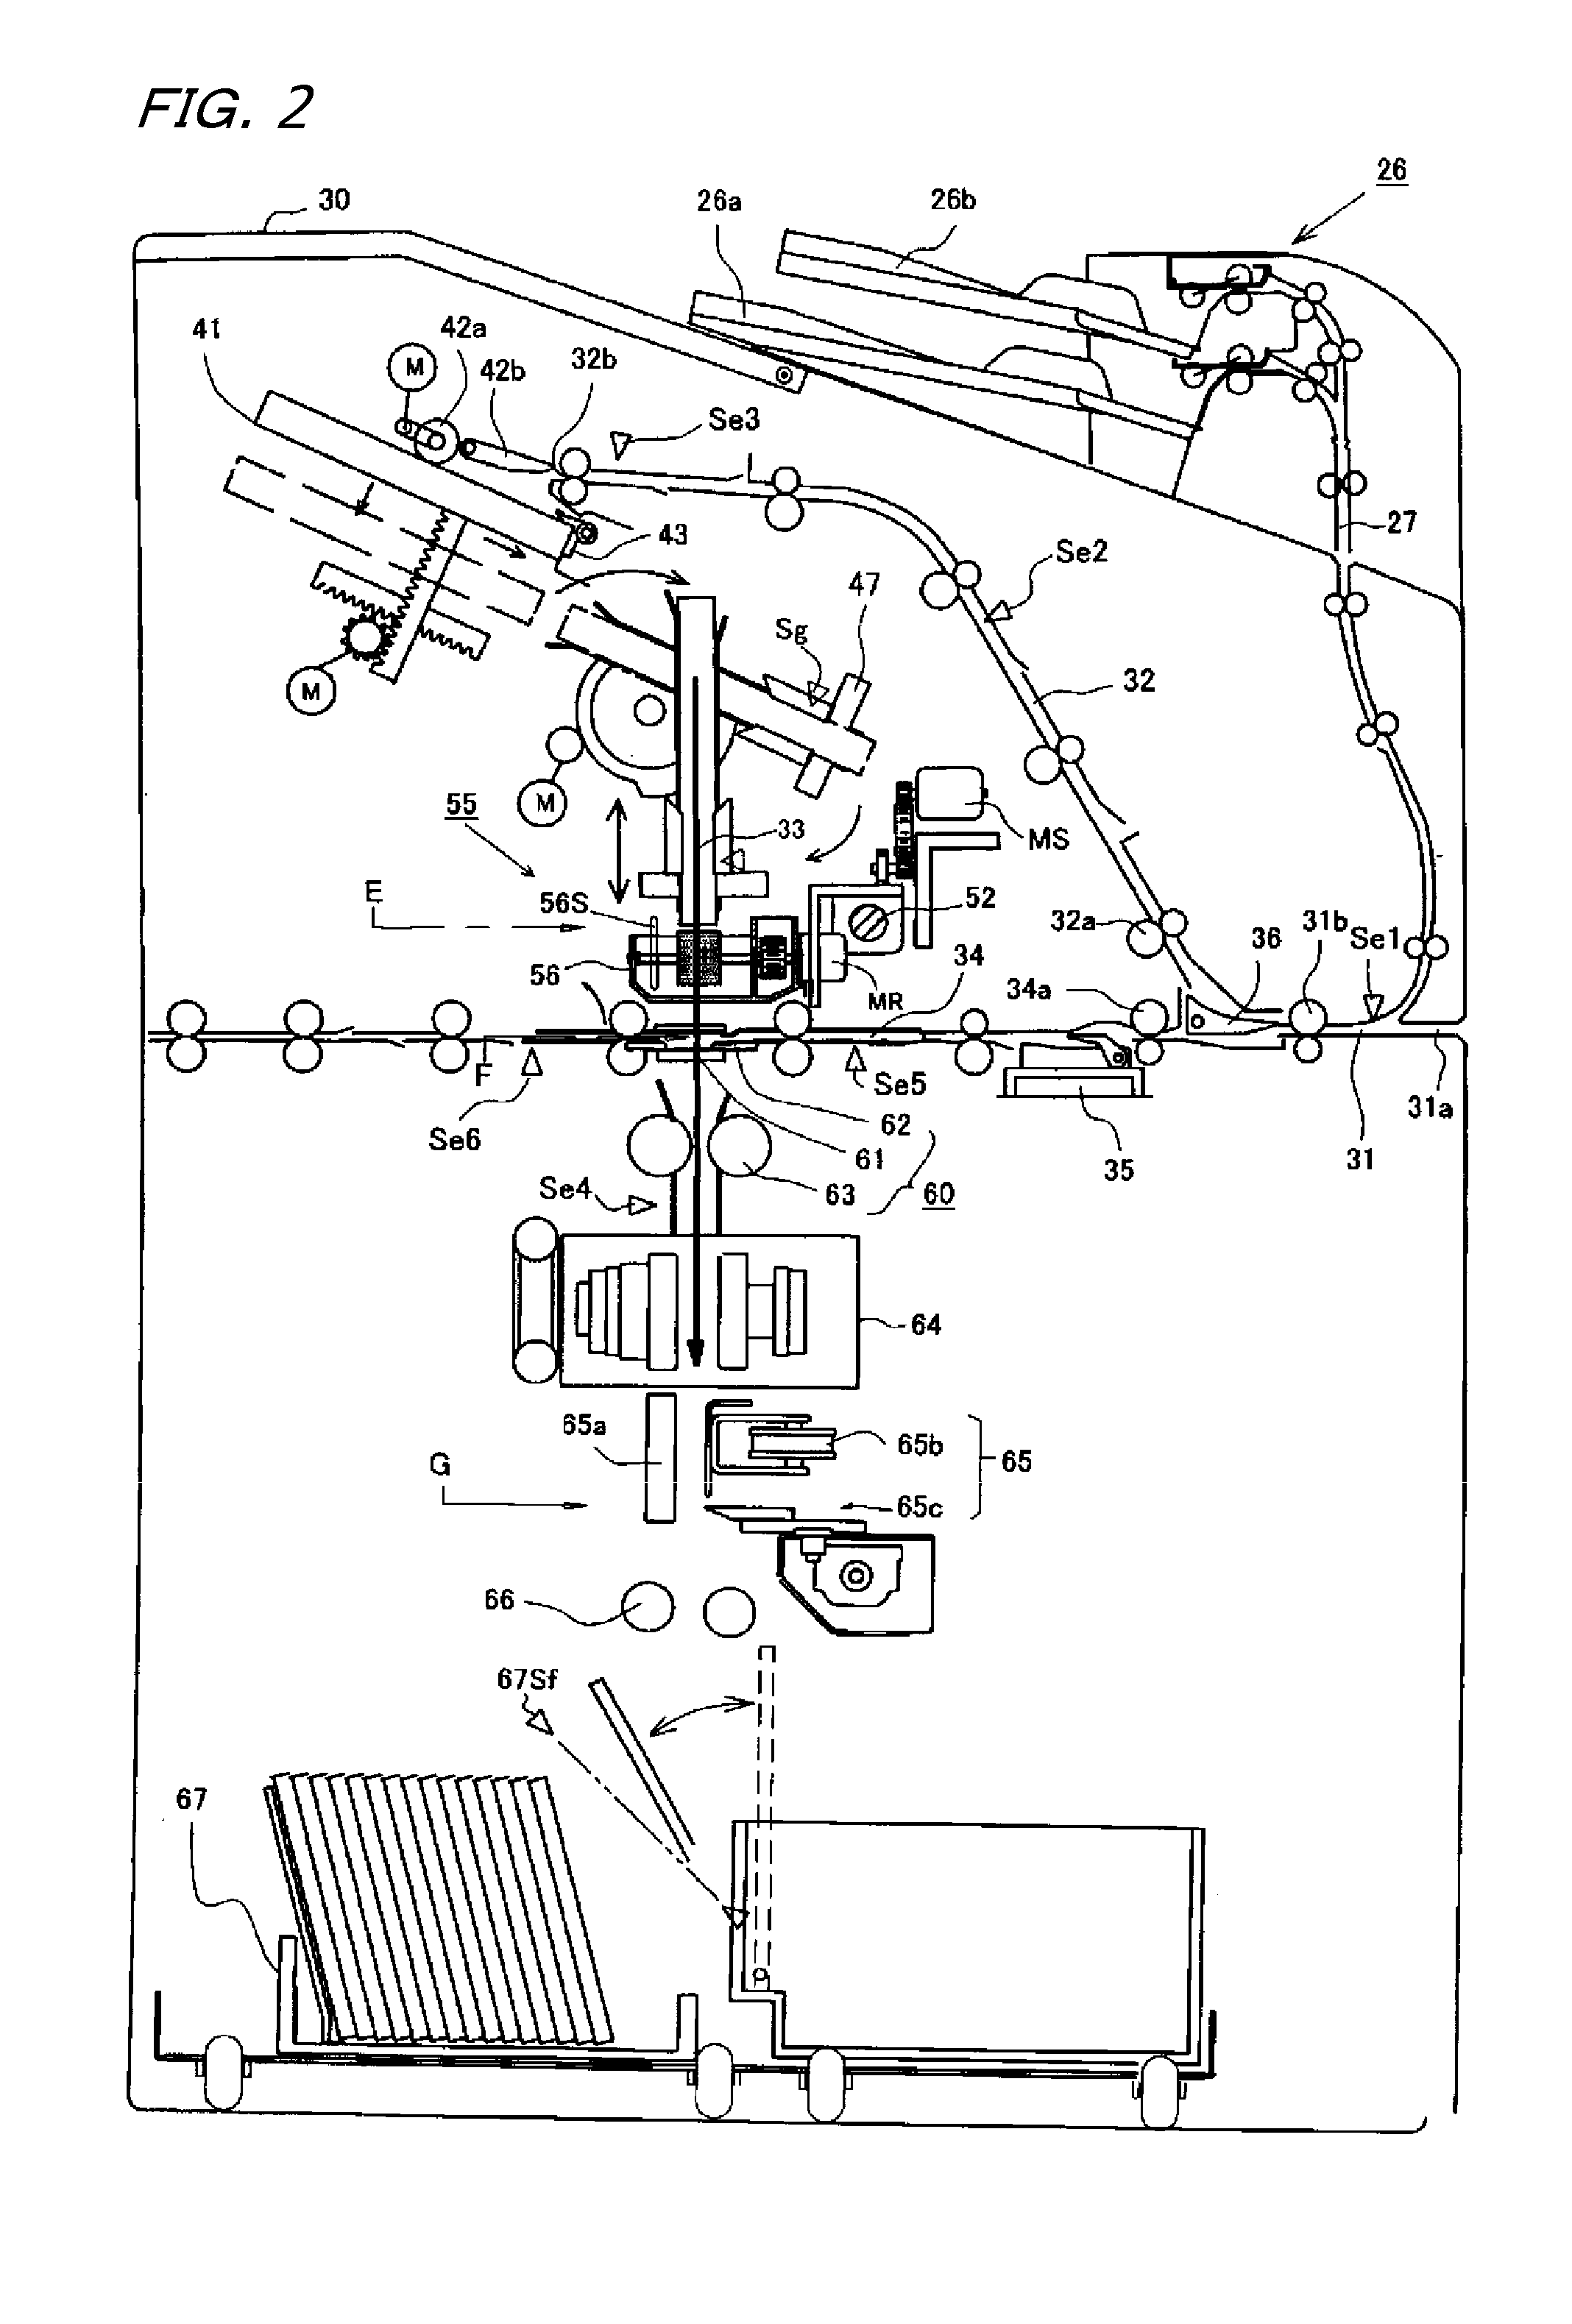 Bookbinding Unit and Image-Forming System